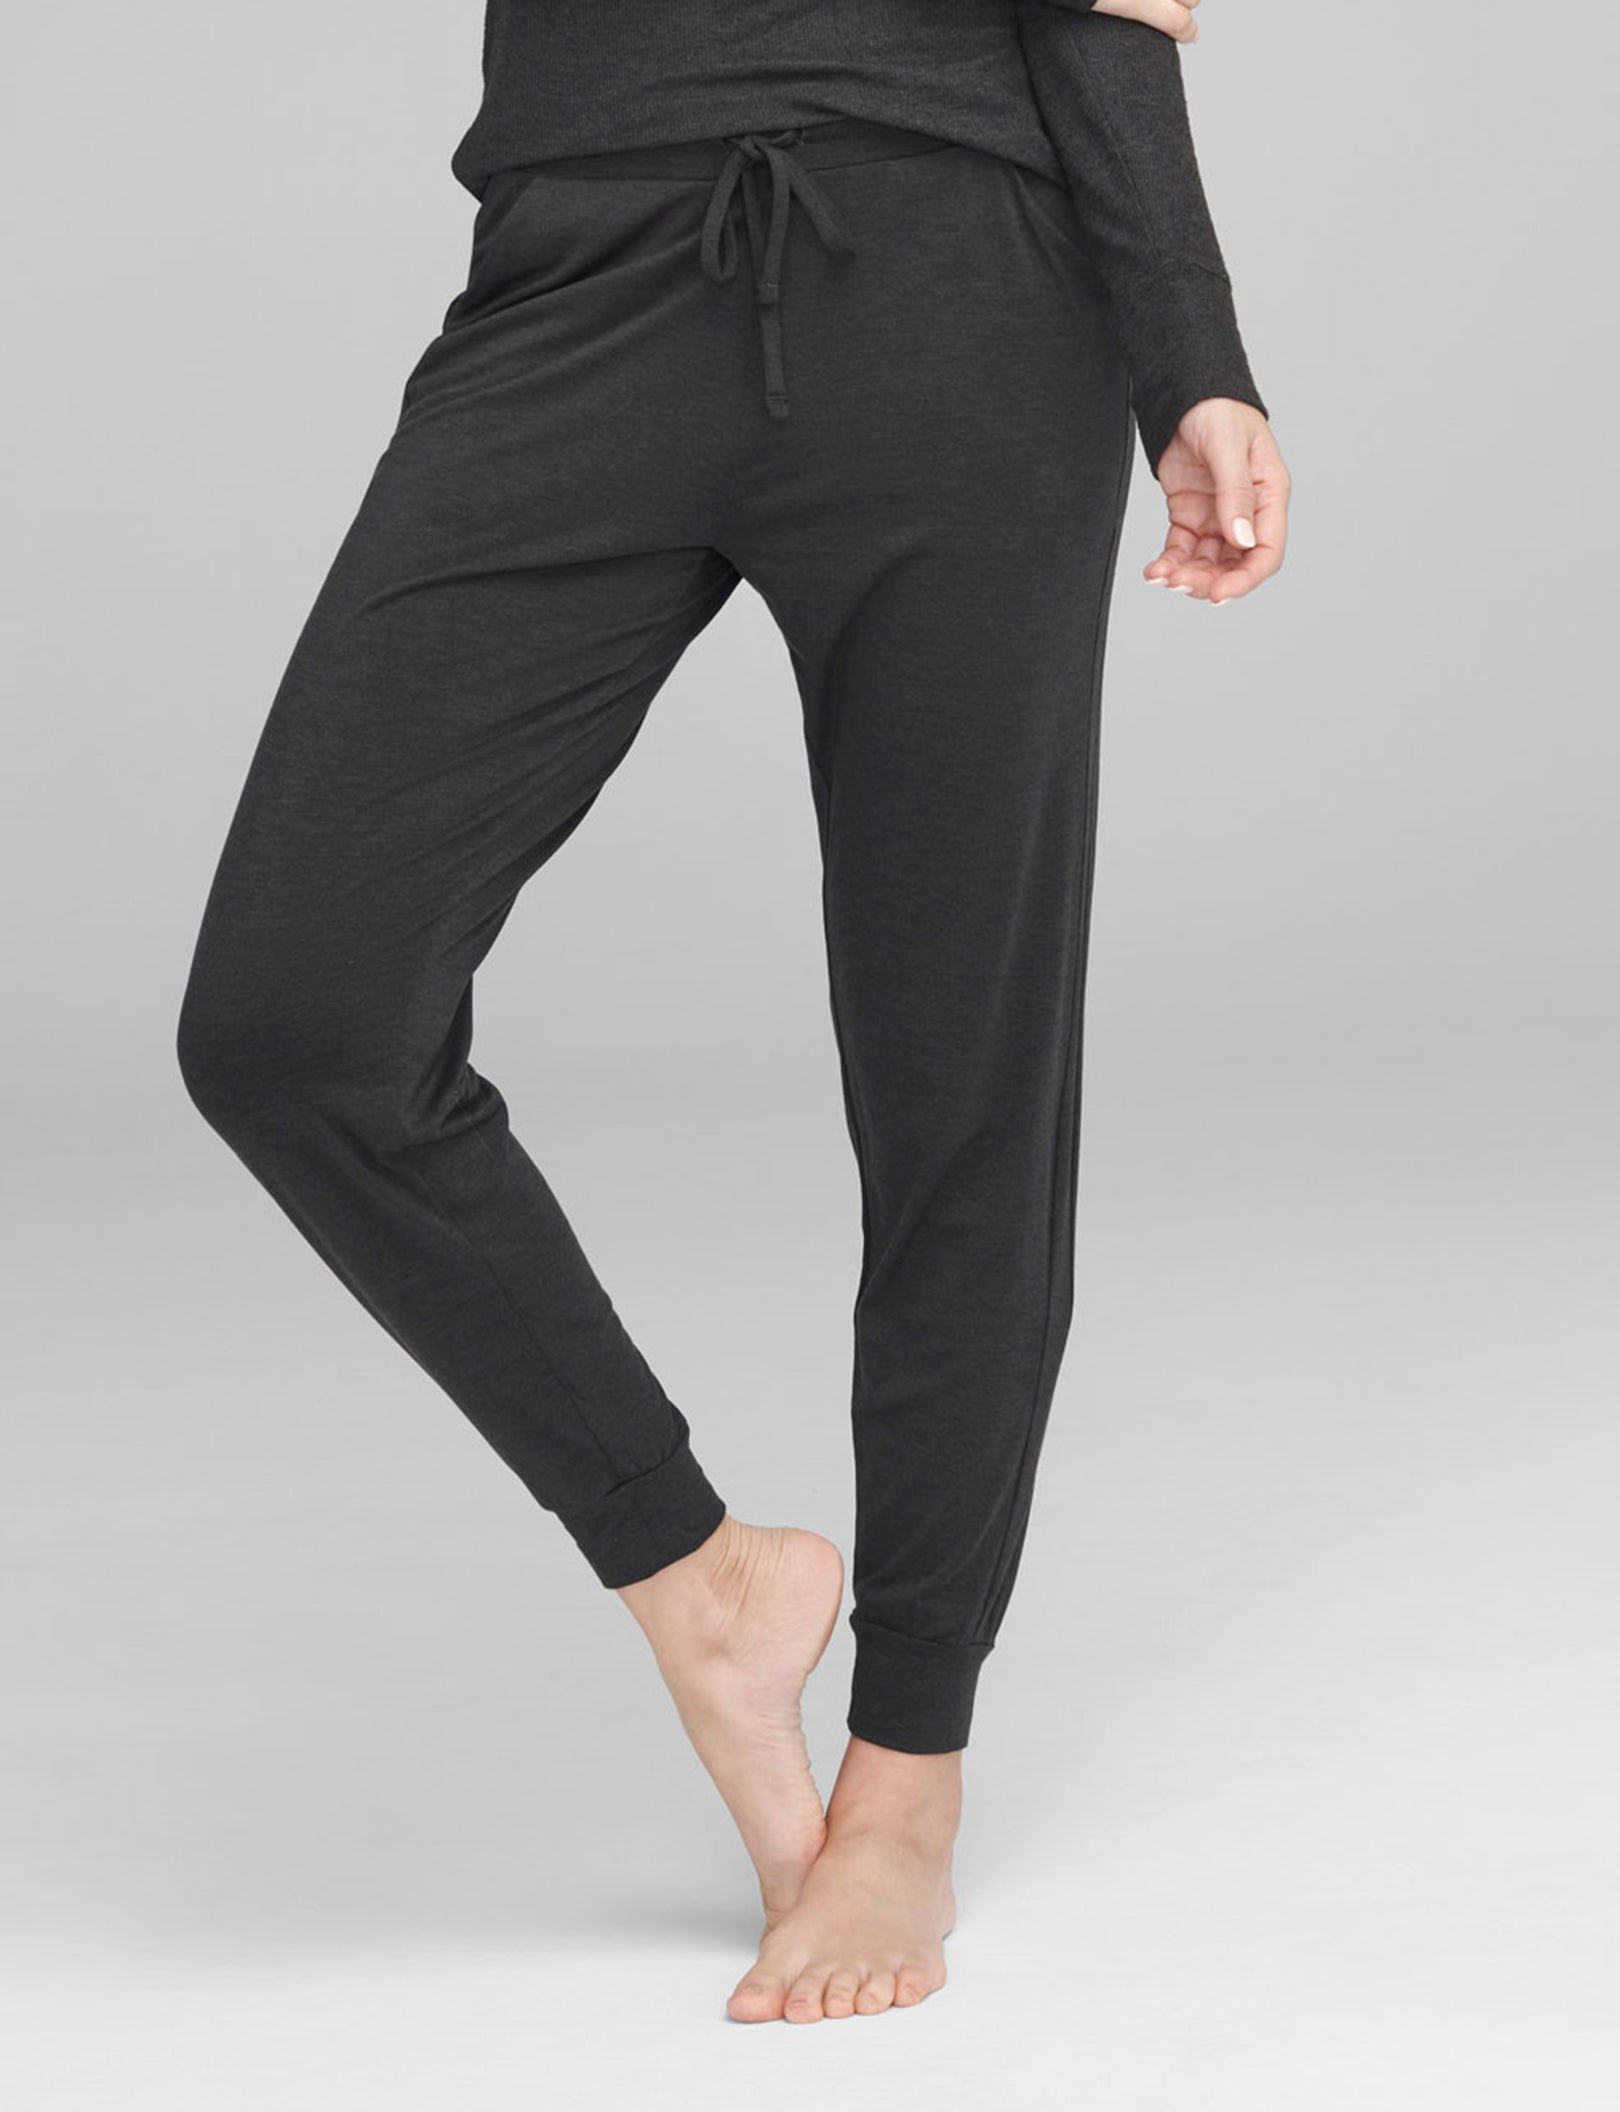 Women's Downtime Jogger | Tommy John